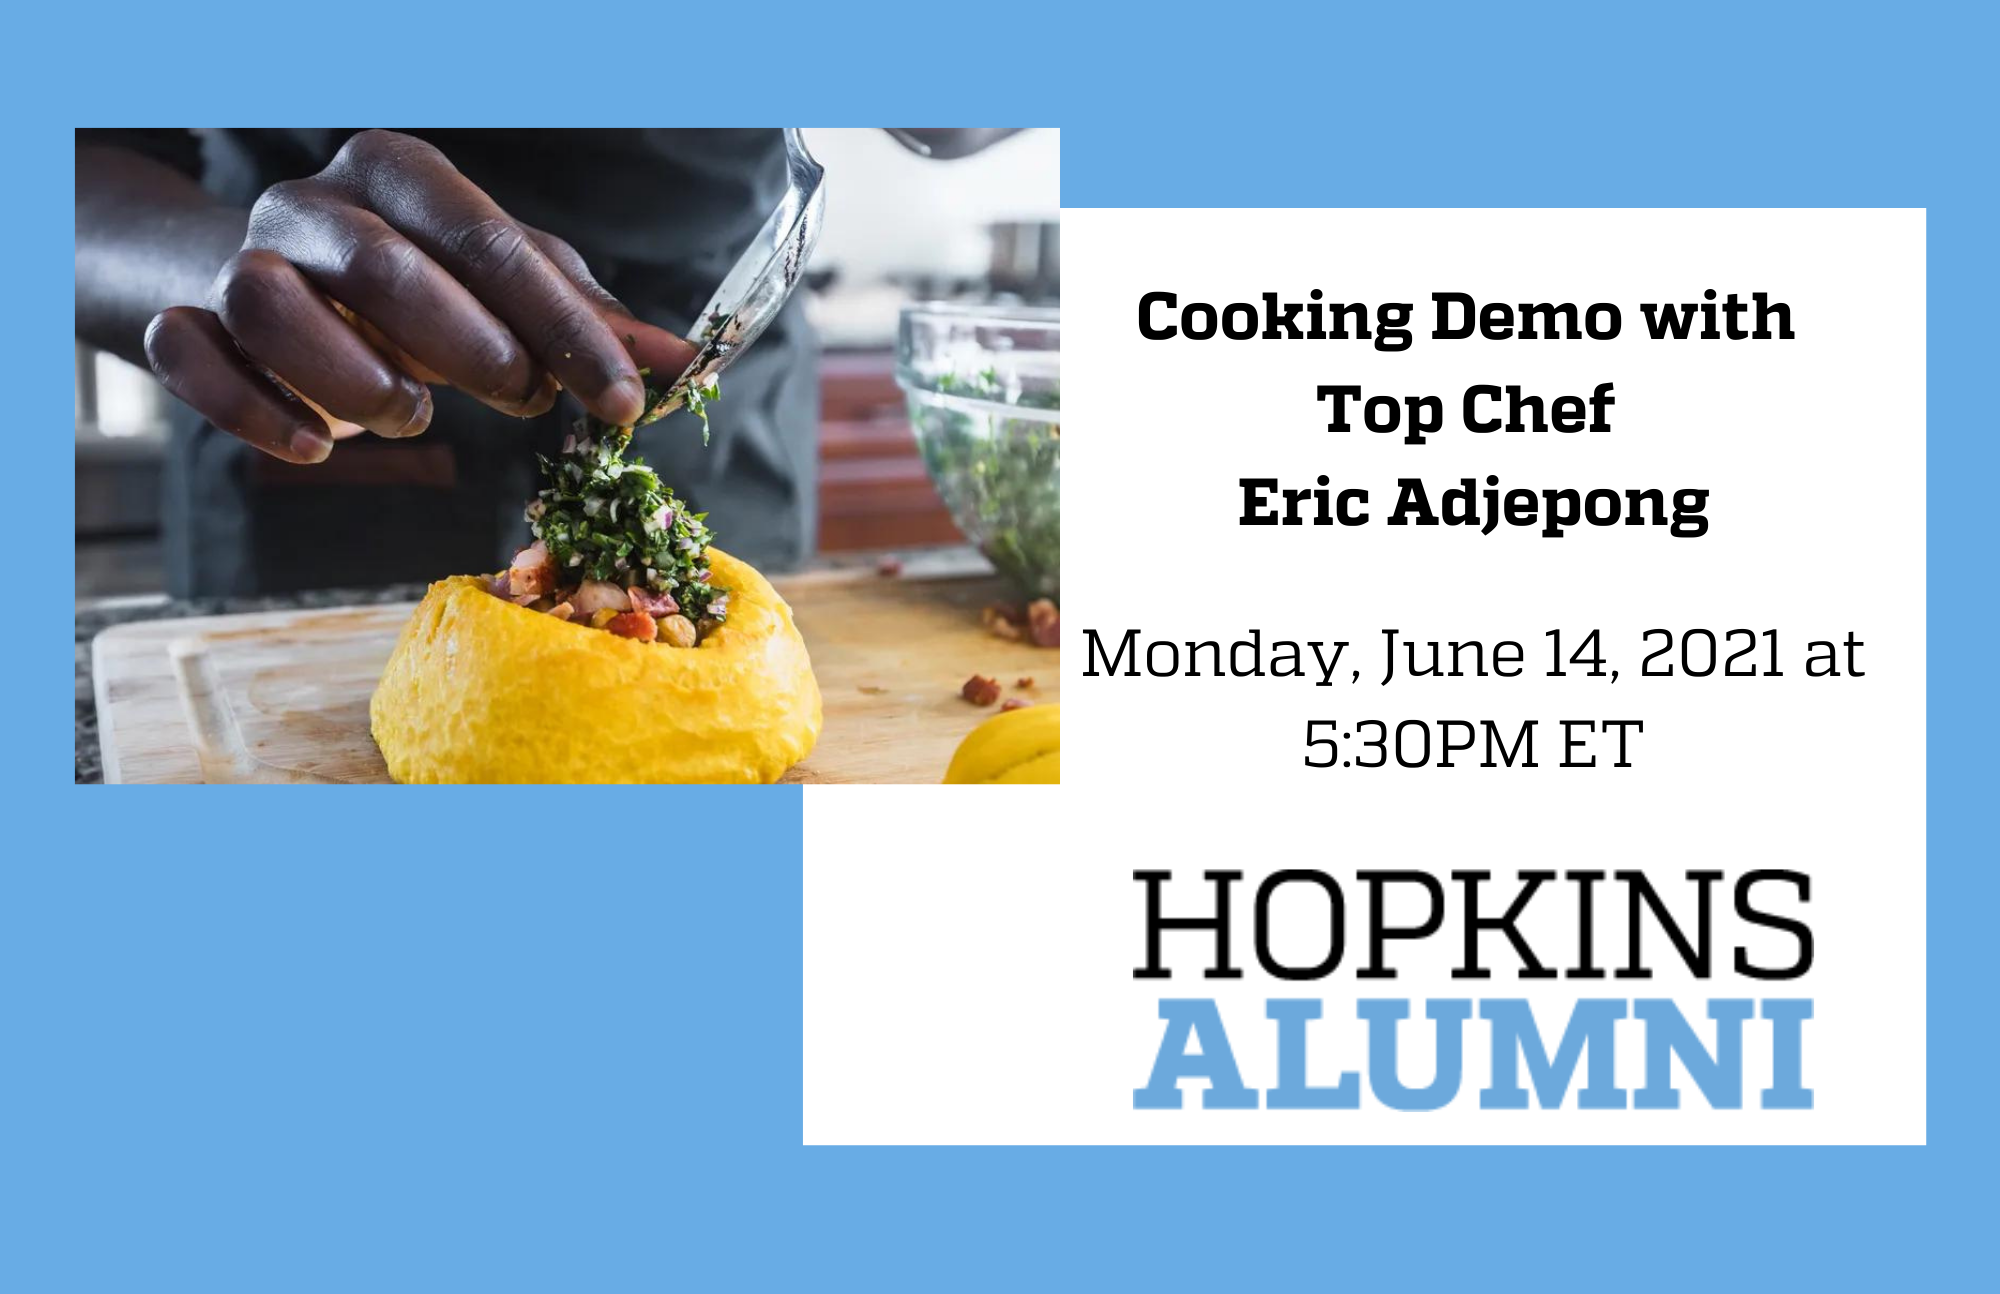 Cooking Demo with Top Chef Eric Adjepong